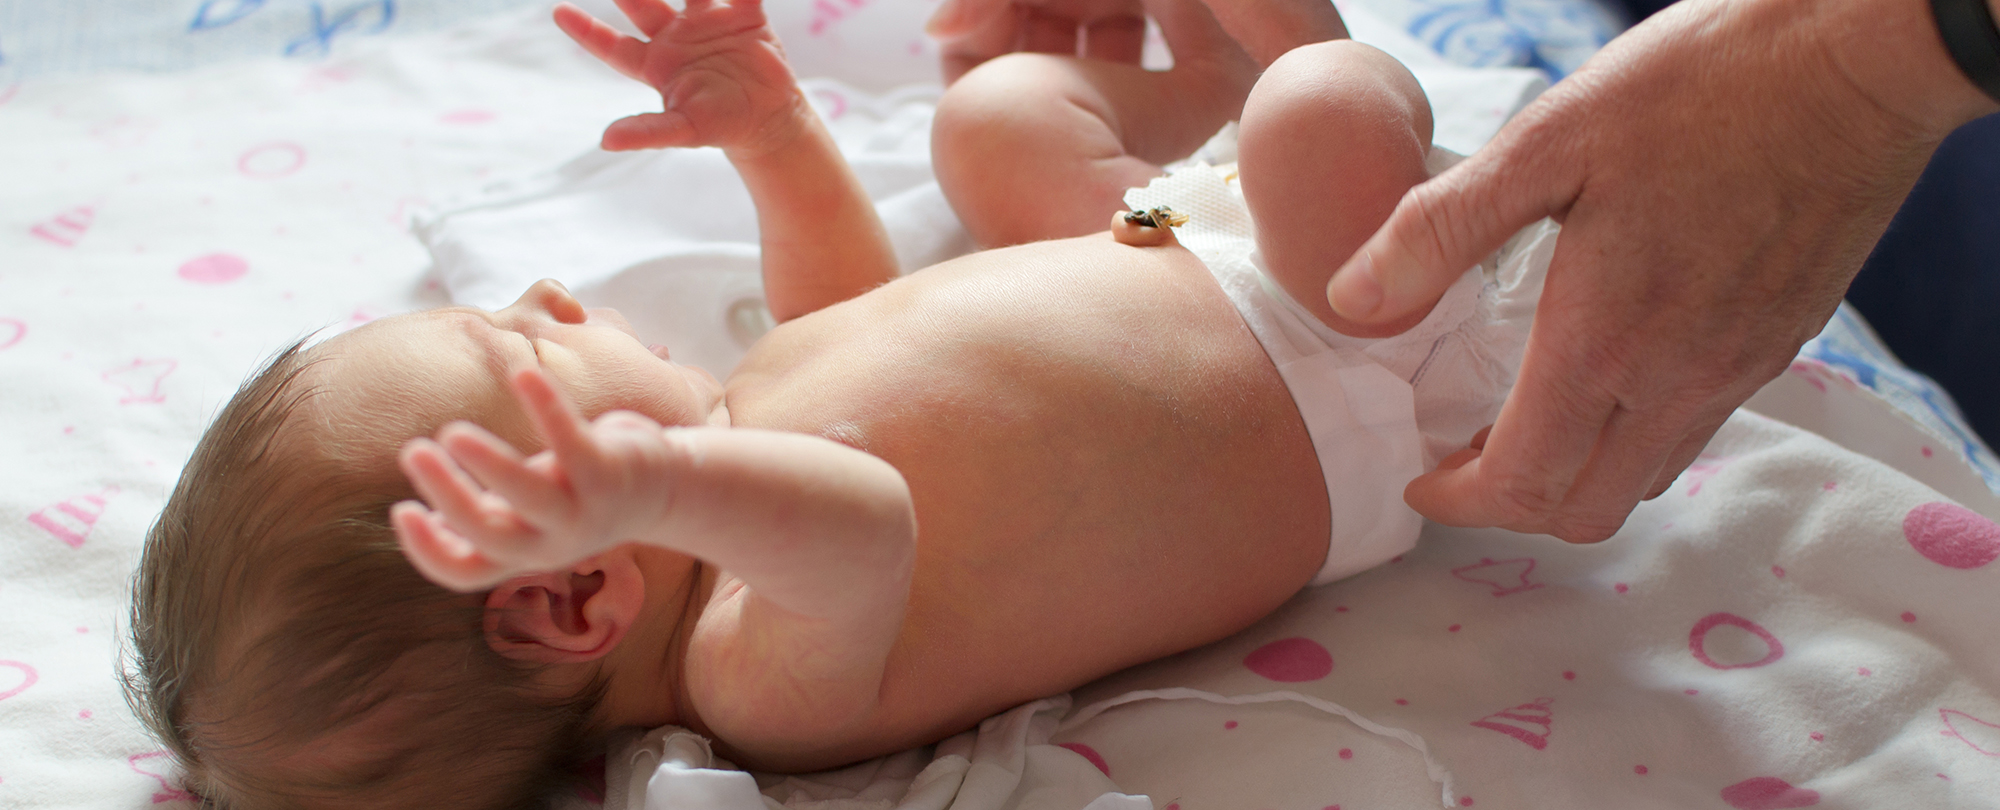 How to care for your baby's umbilical cord